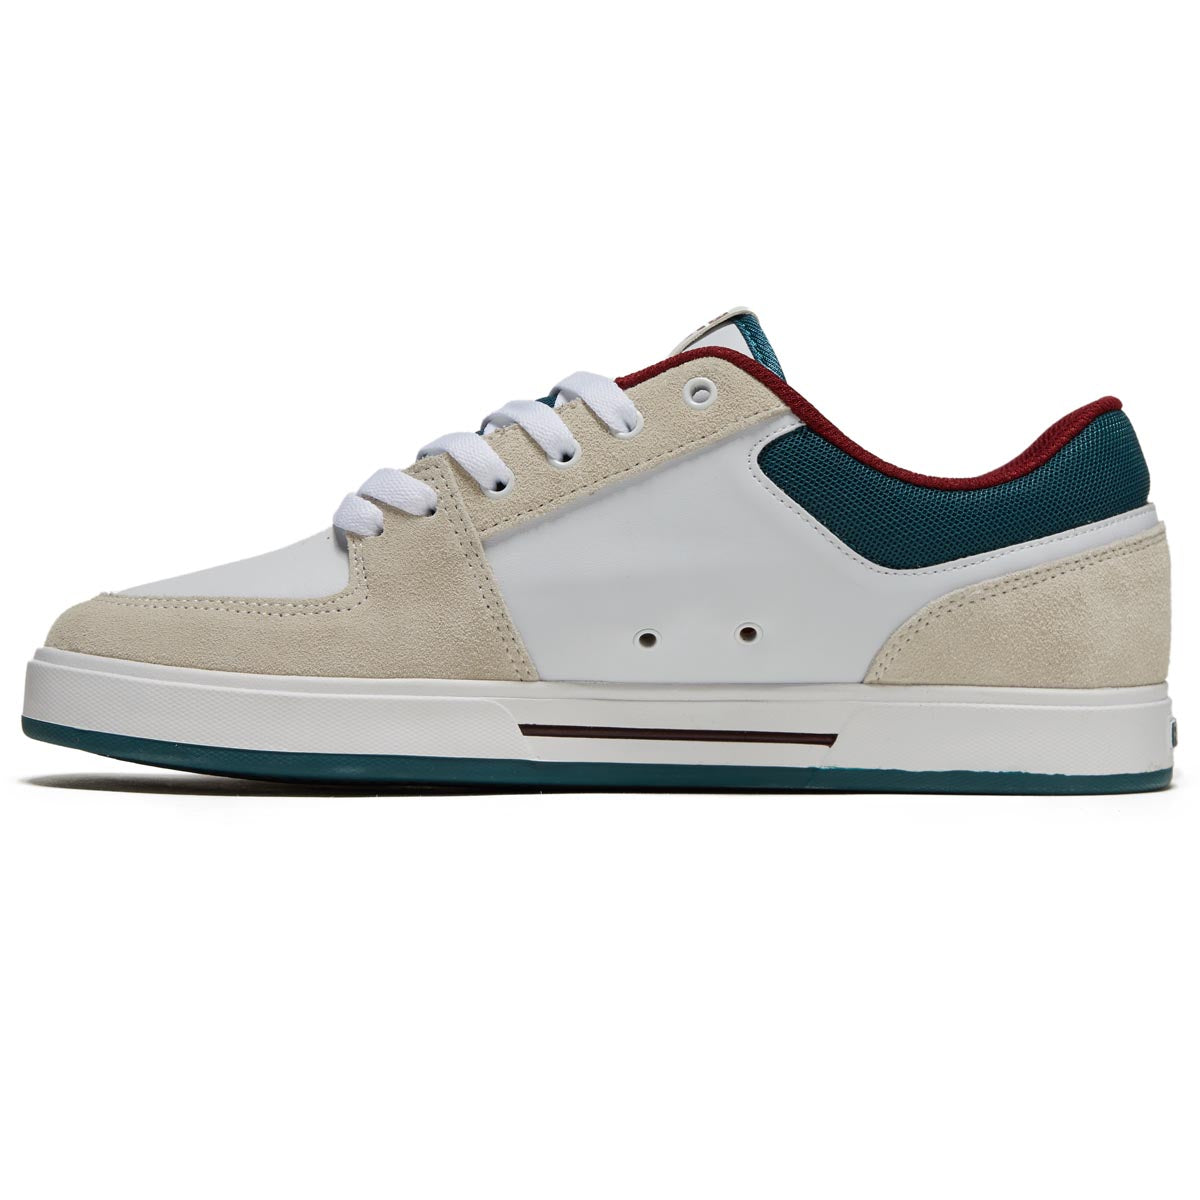 Fallen Patriot Shoes - White/Teal/Burgundy image 2